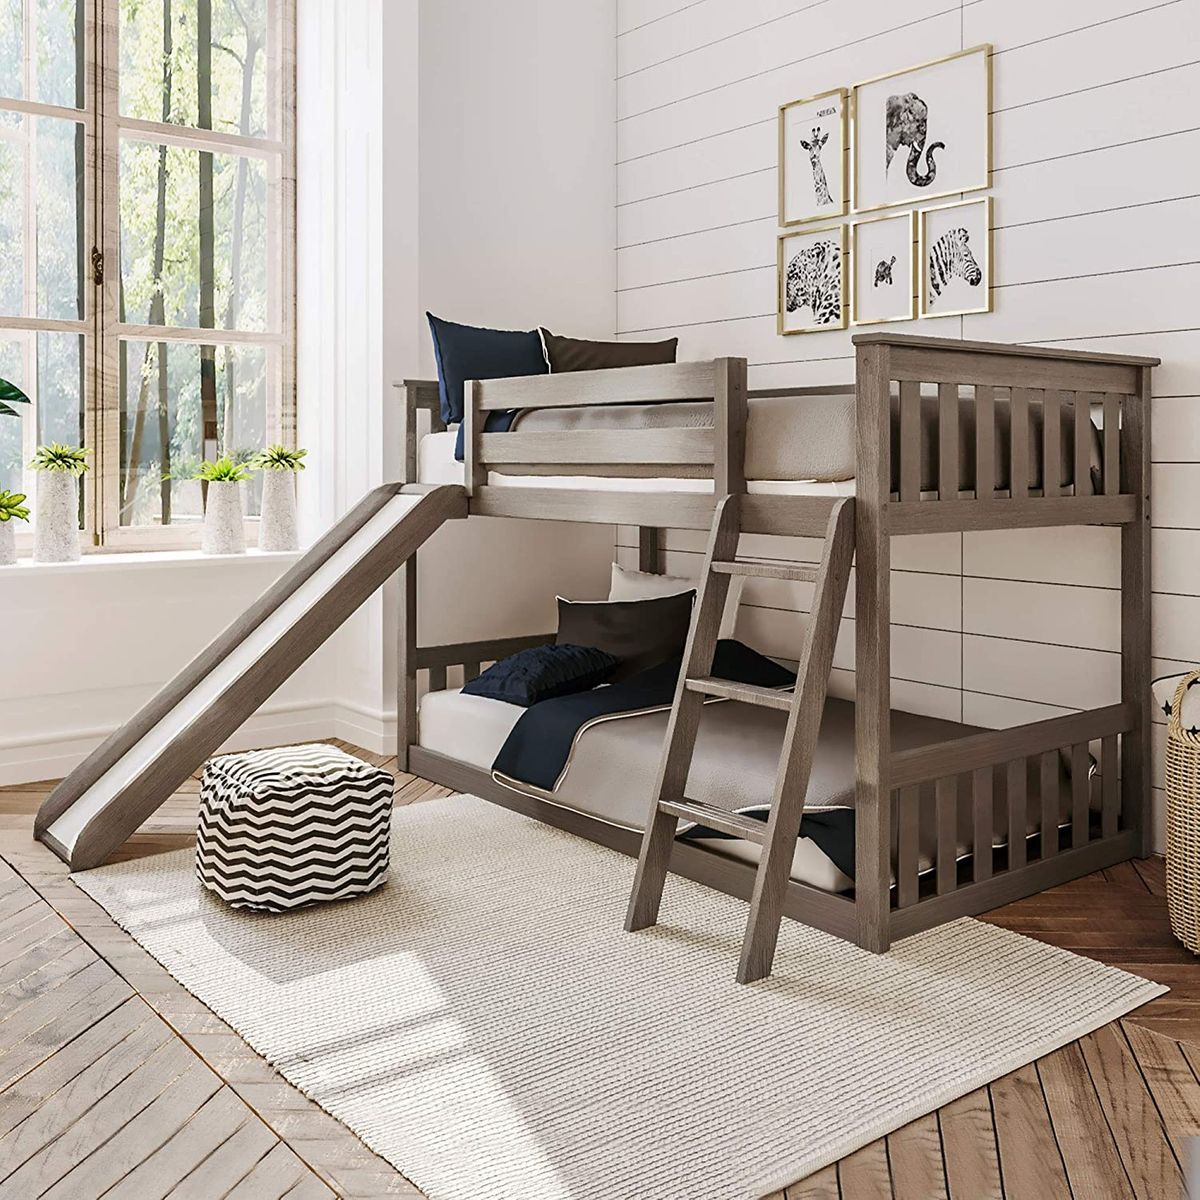 8 Best Bunk Beds 2020 The Strategist, Bunk Beds That Convert To Twin